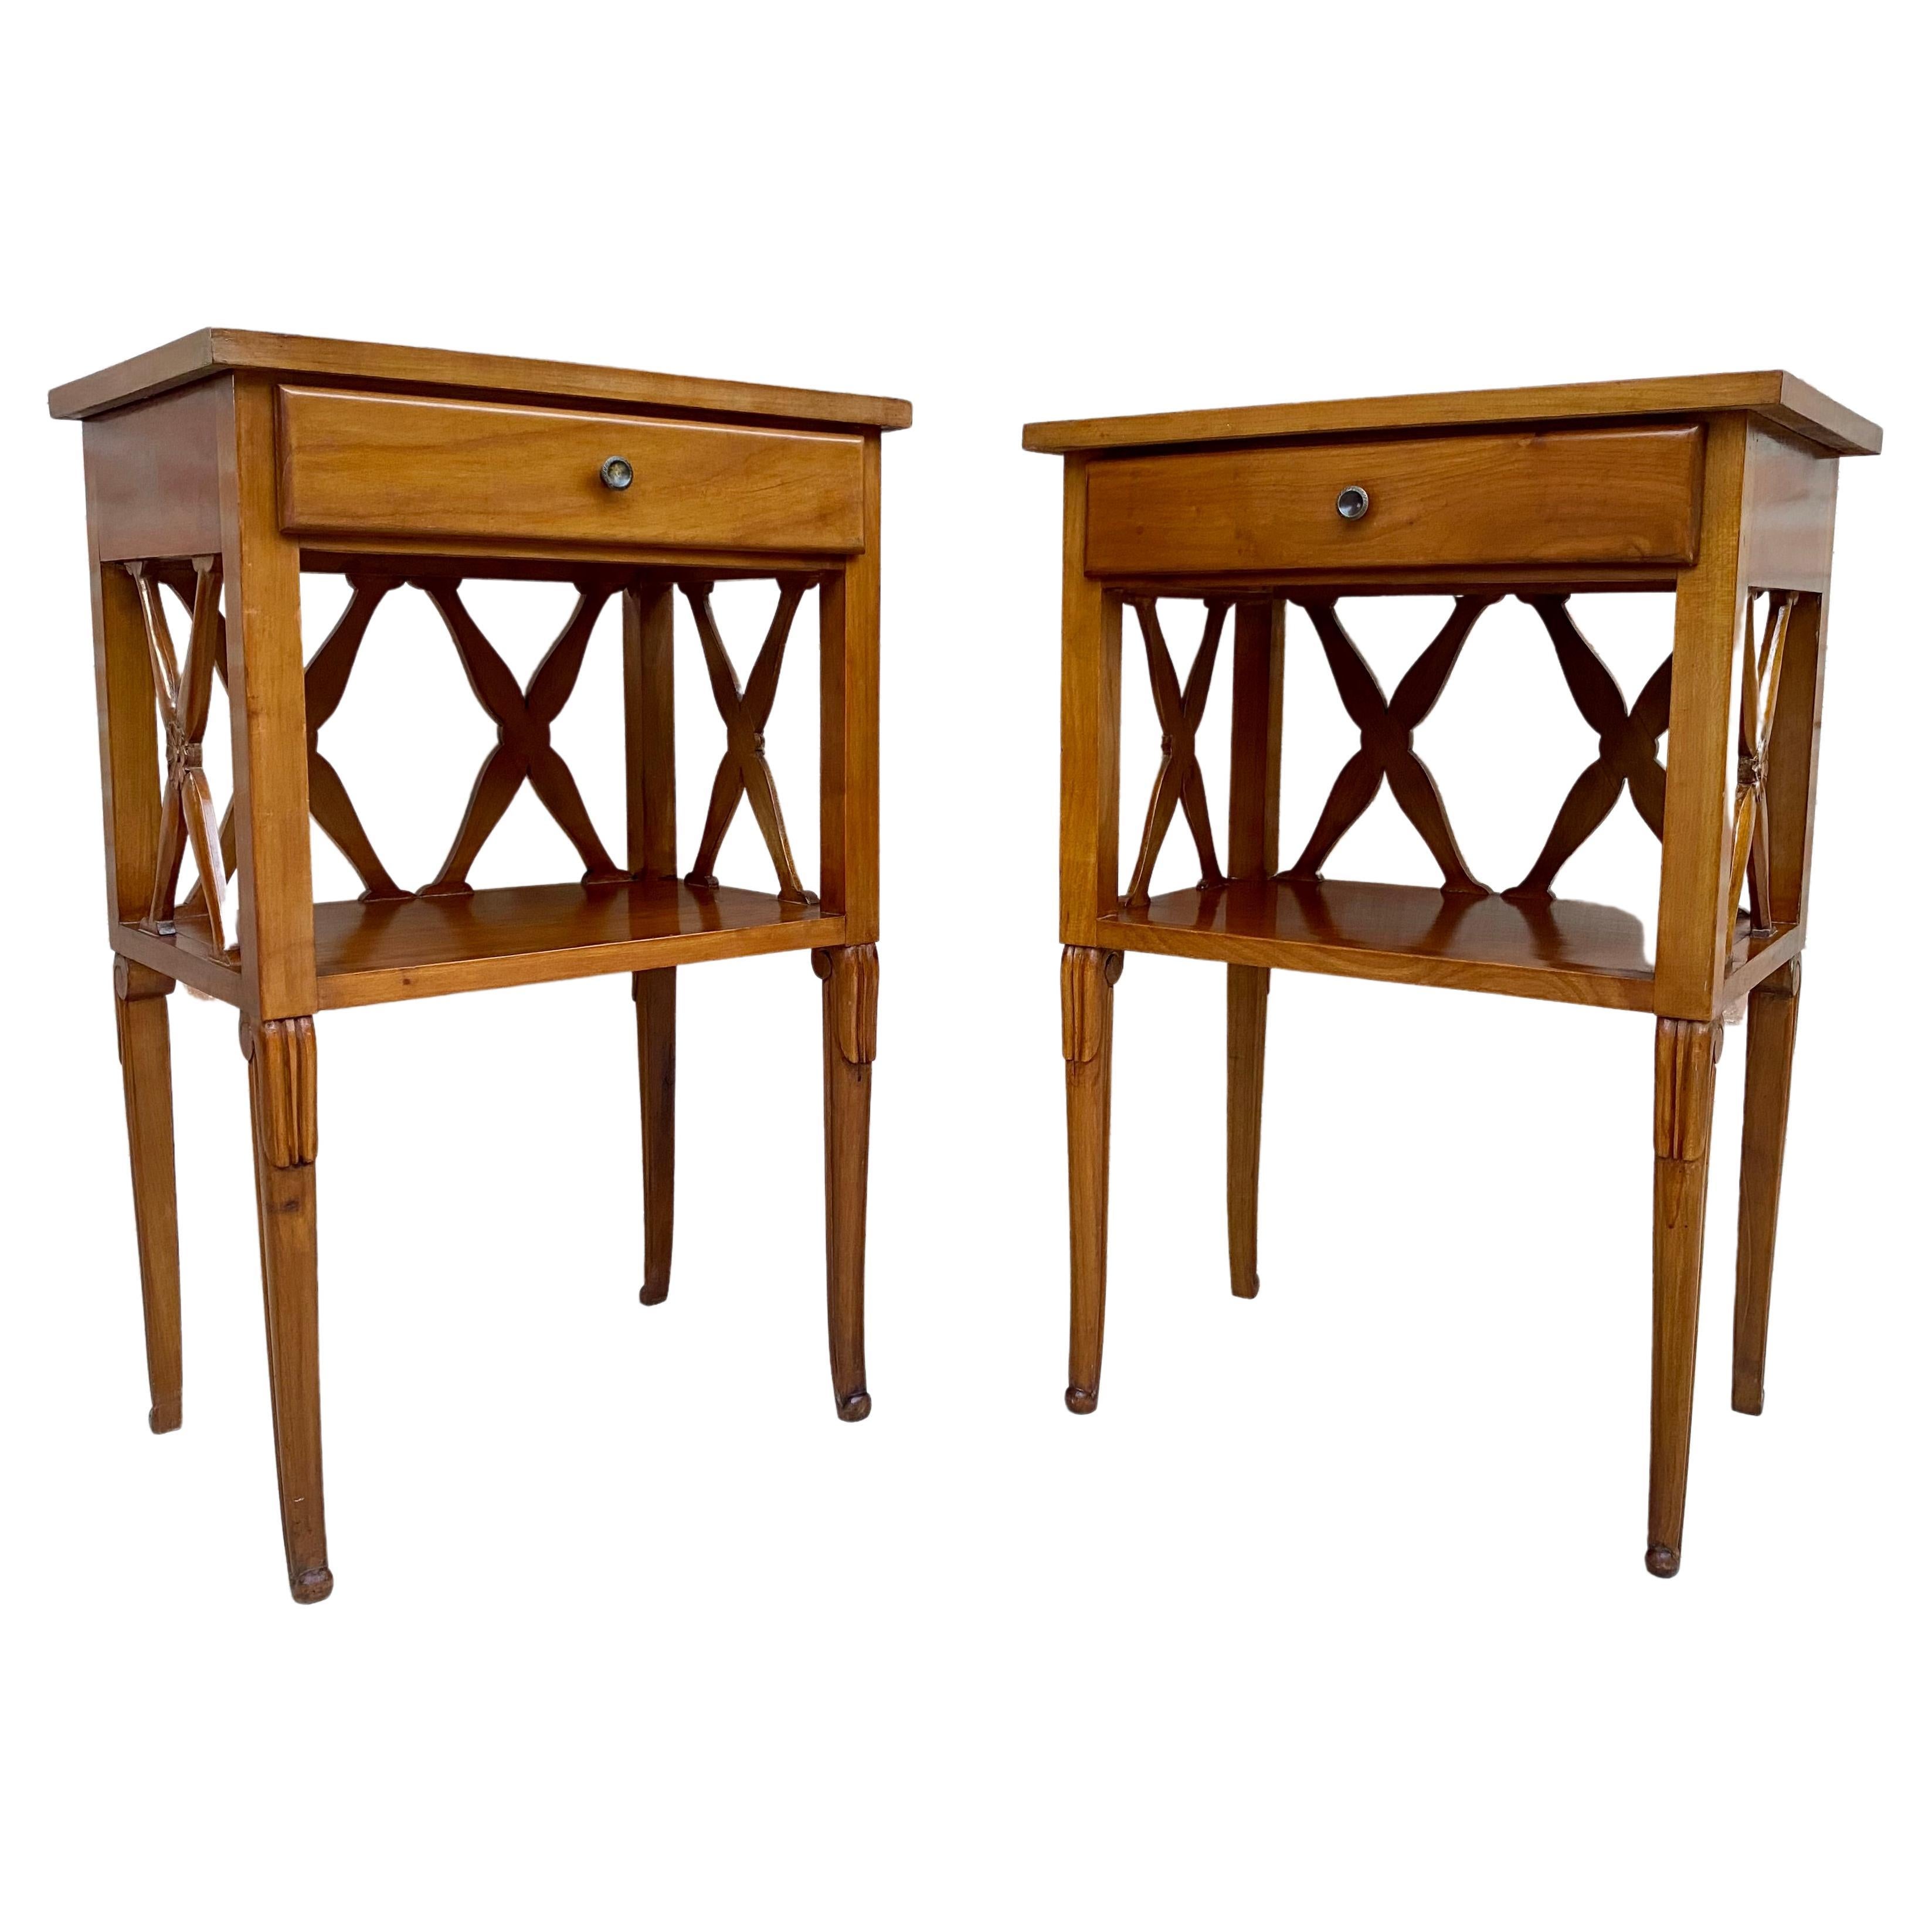 Fruitwood Bedside Tables or Nightstands, Set of 2